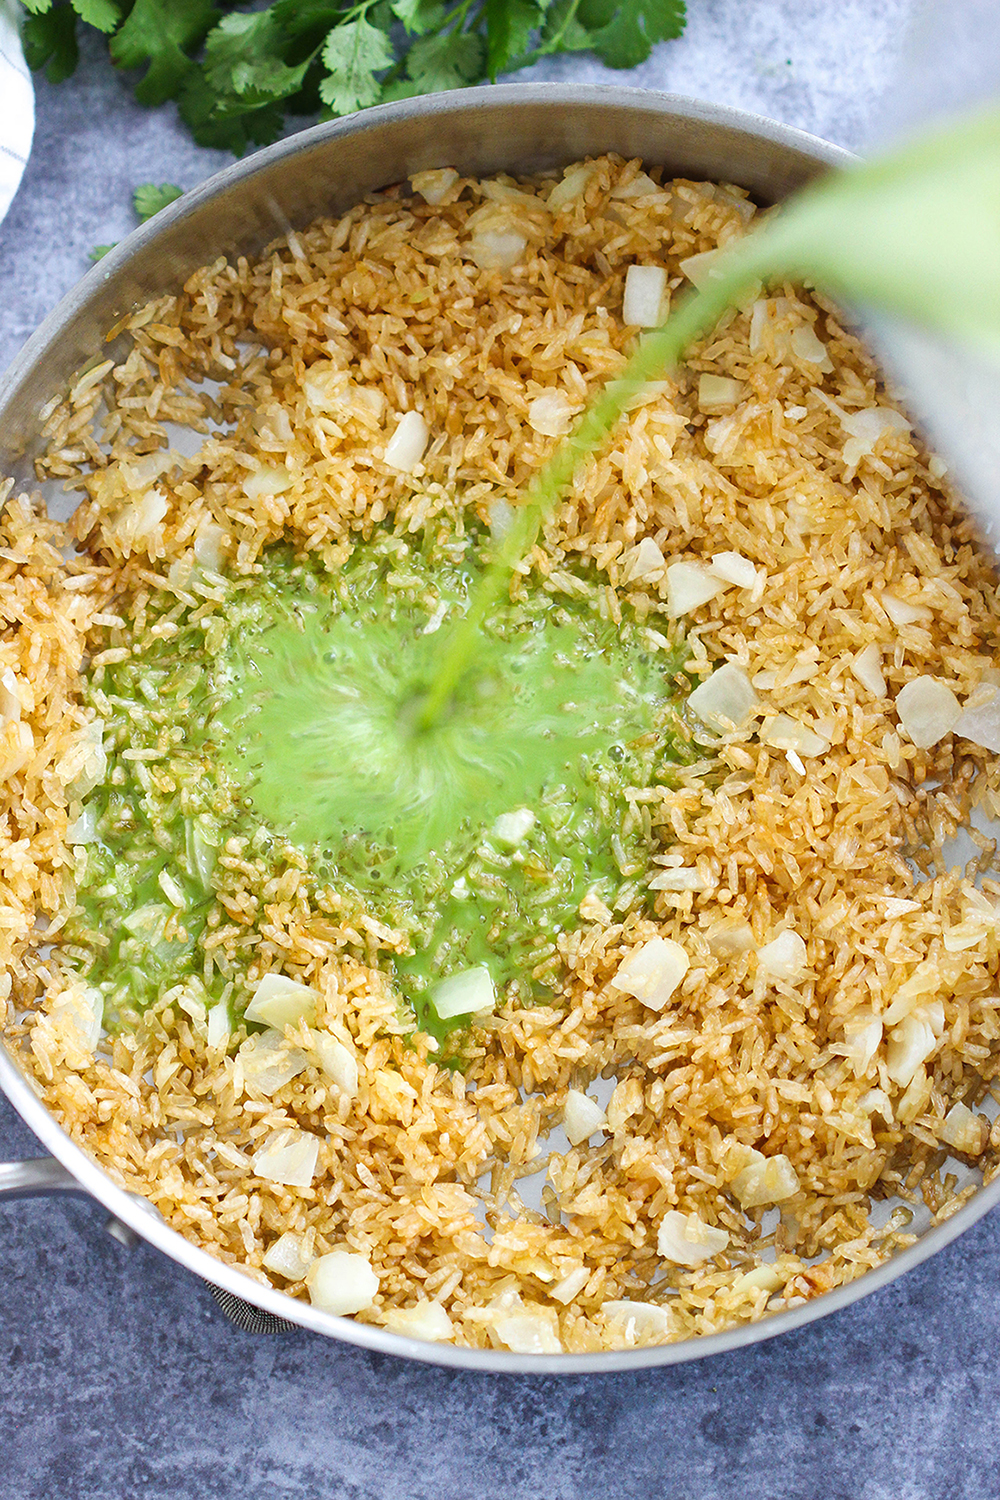 Mexican Green Rice (Arroz Verde) Recipe. Easy to prepare and delicious, this classic Mexican side dish is another great way to incorporate an extra serving of veggies into your family's next meal!